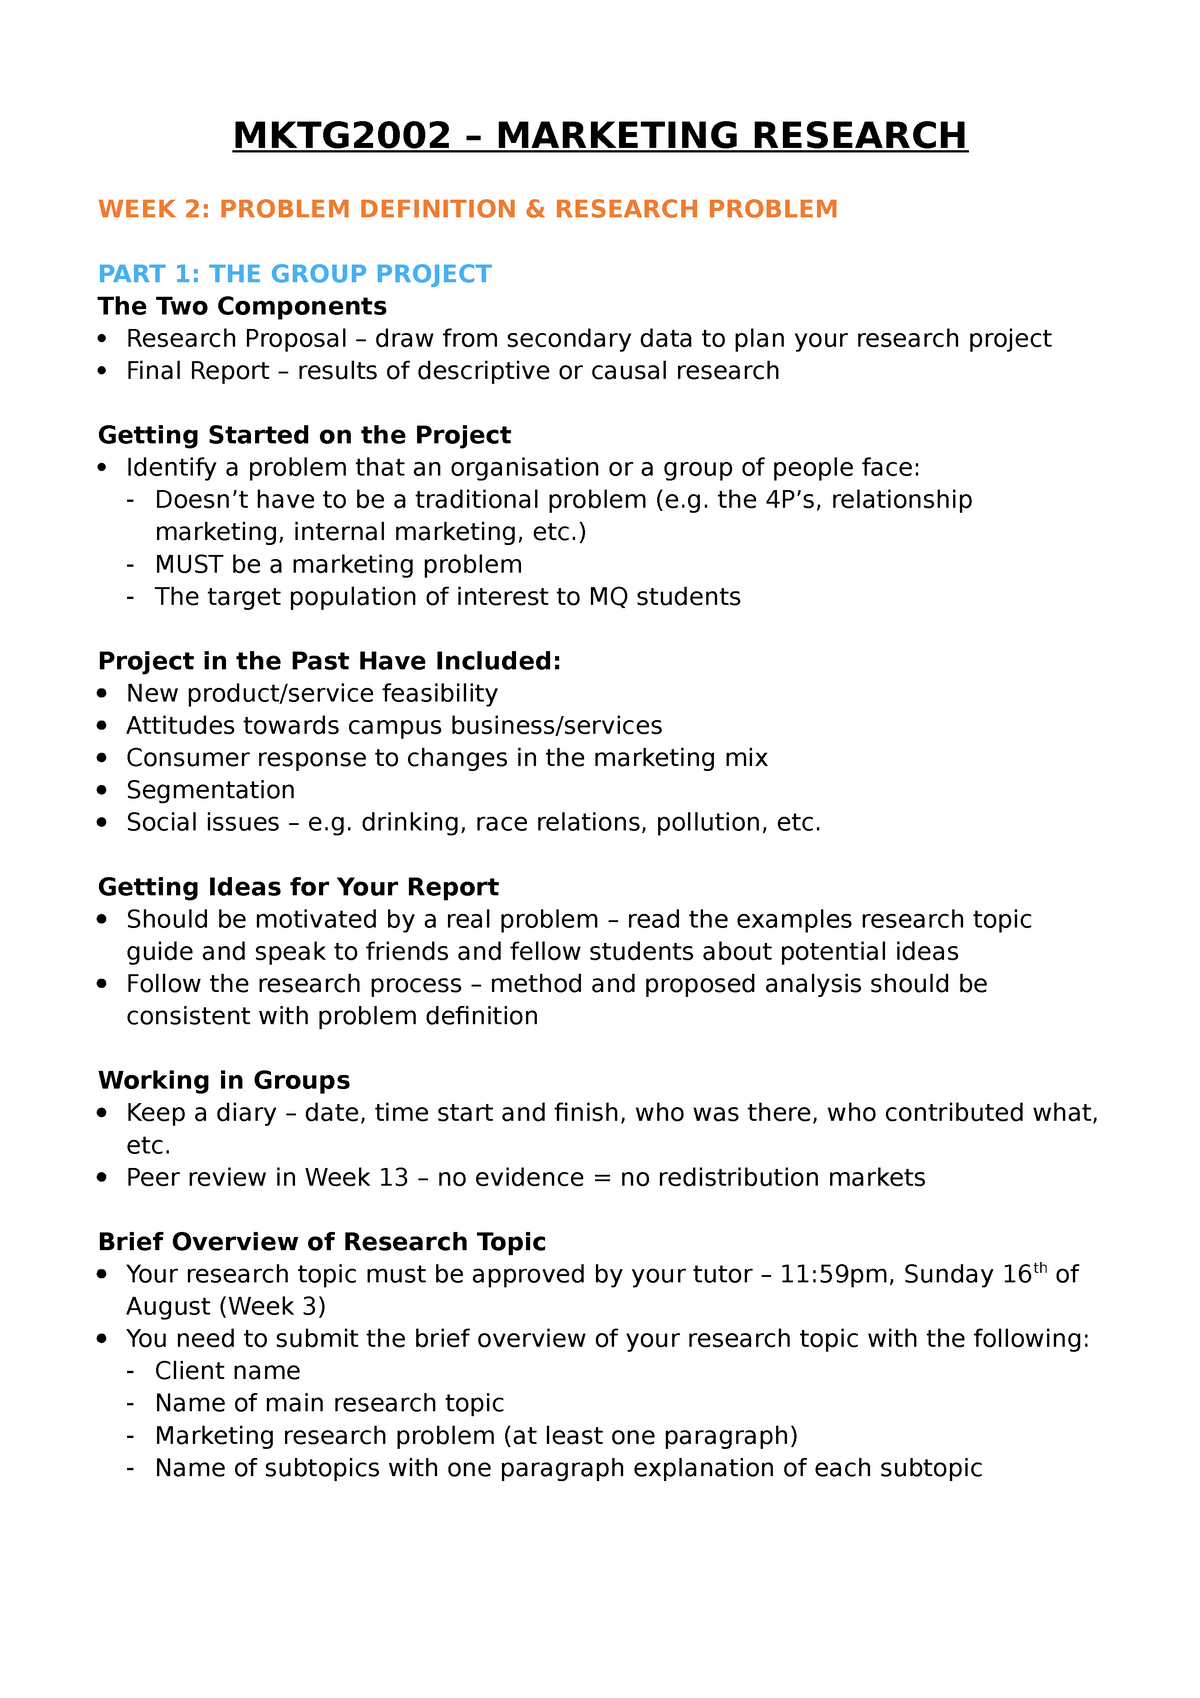 examples of problem definition in marketing research